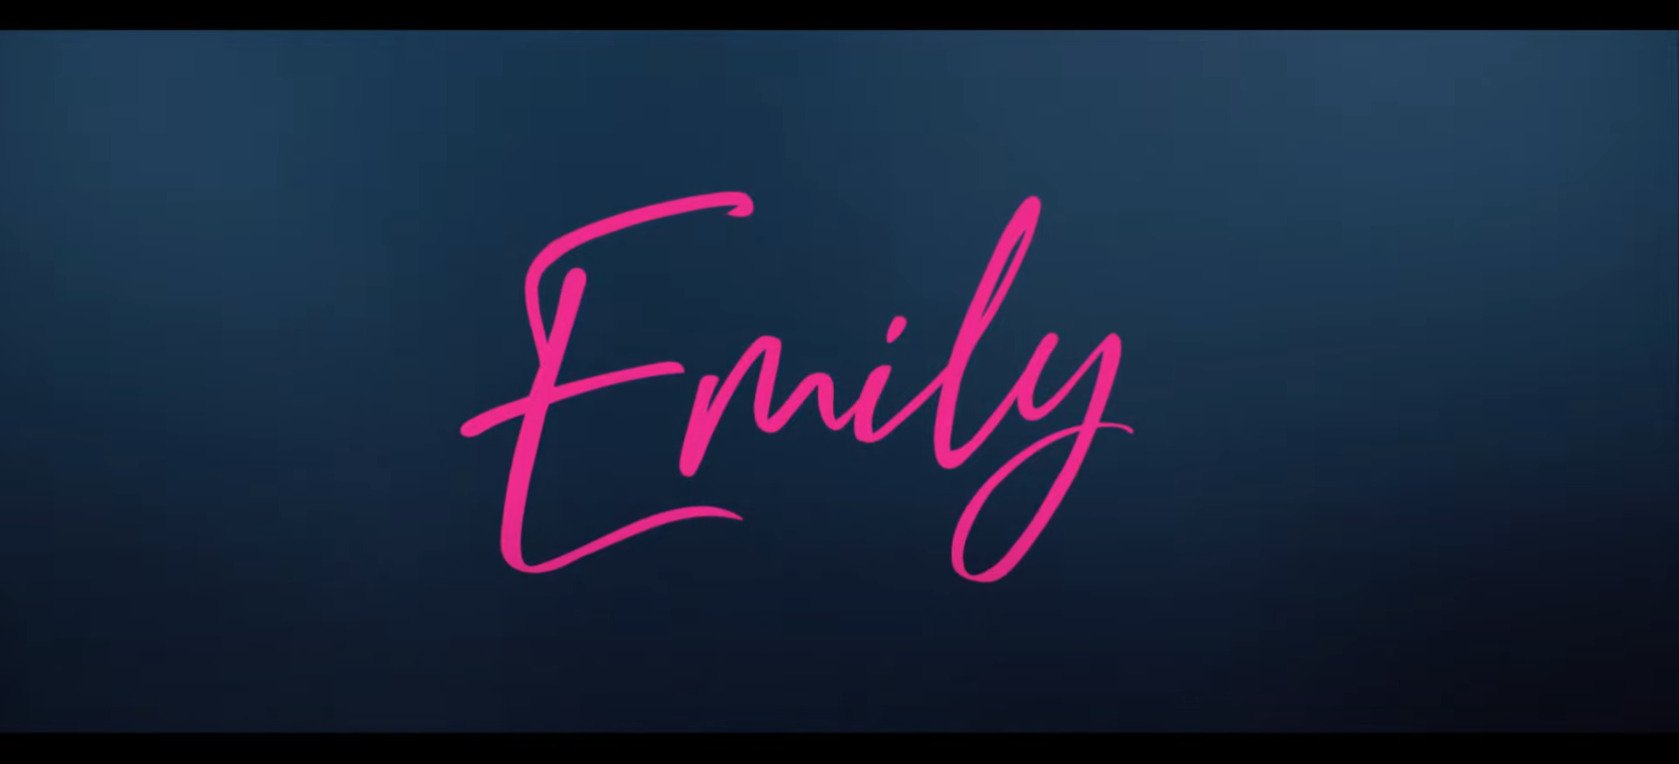 Image name emily title the 1 image from the post Movie "Emily" set for 14 October 2022 Release in Yorkshire.com.